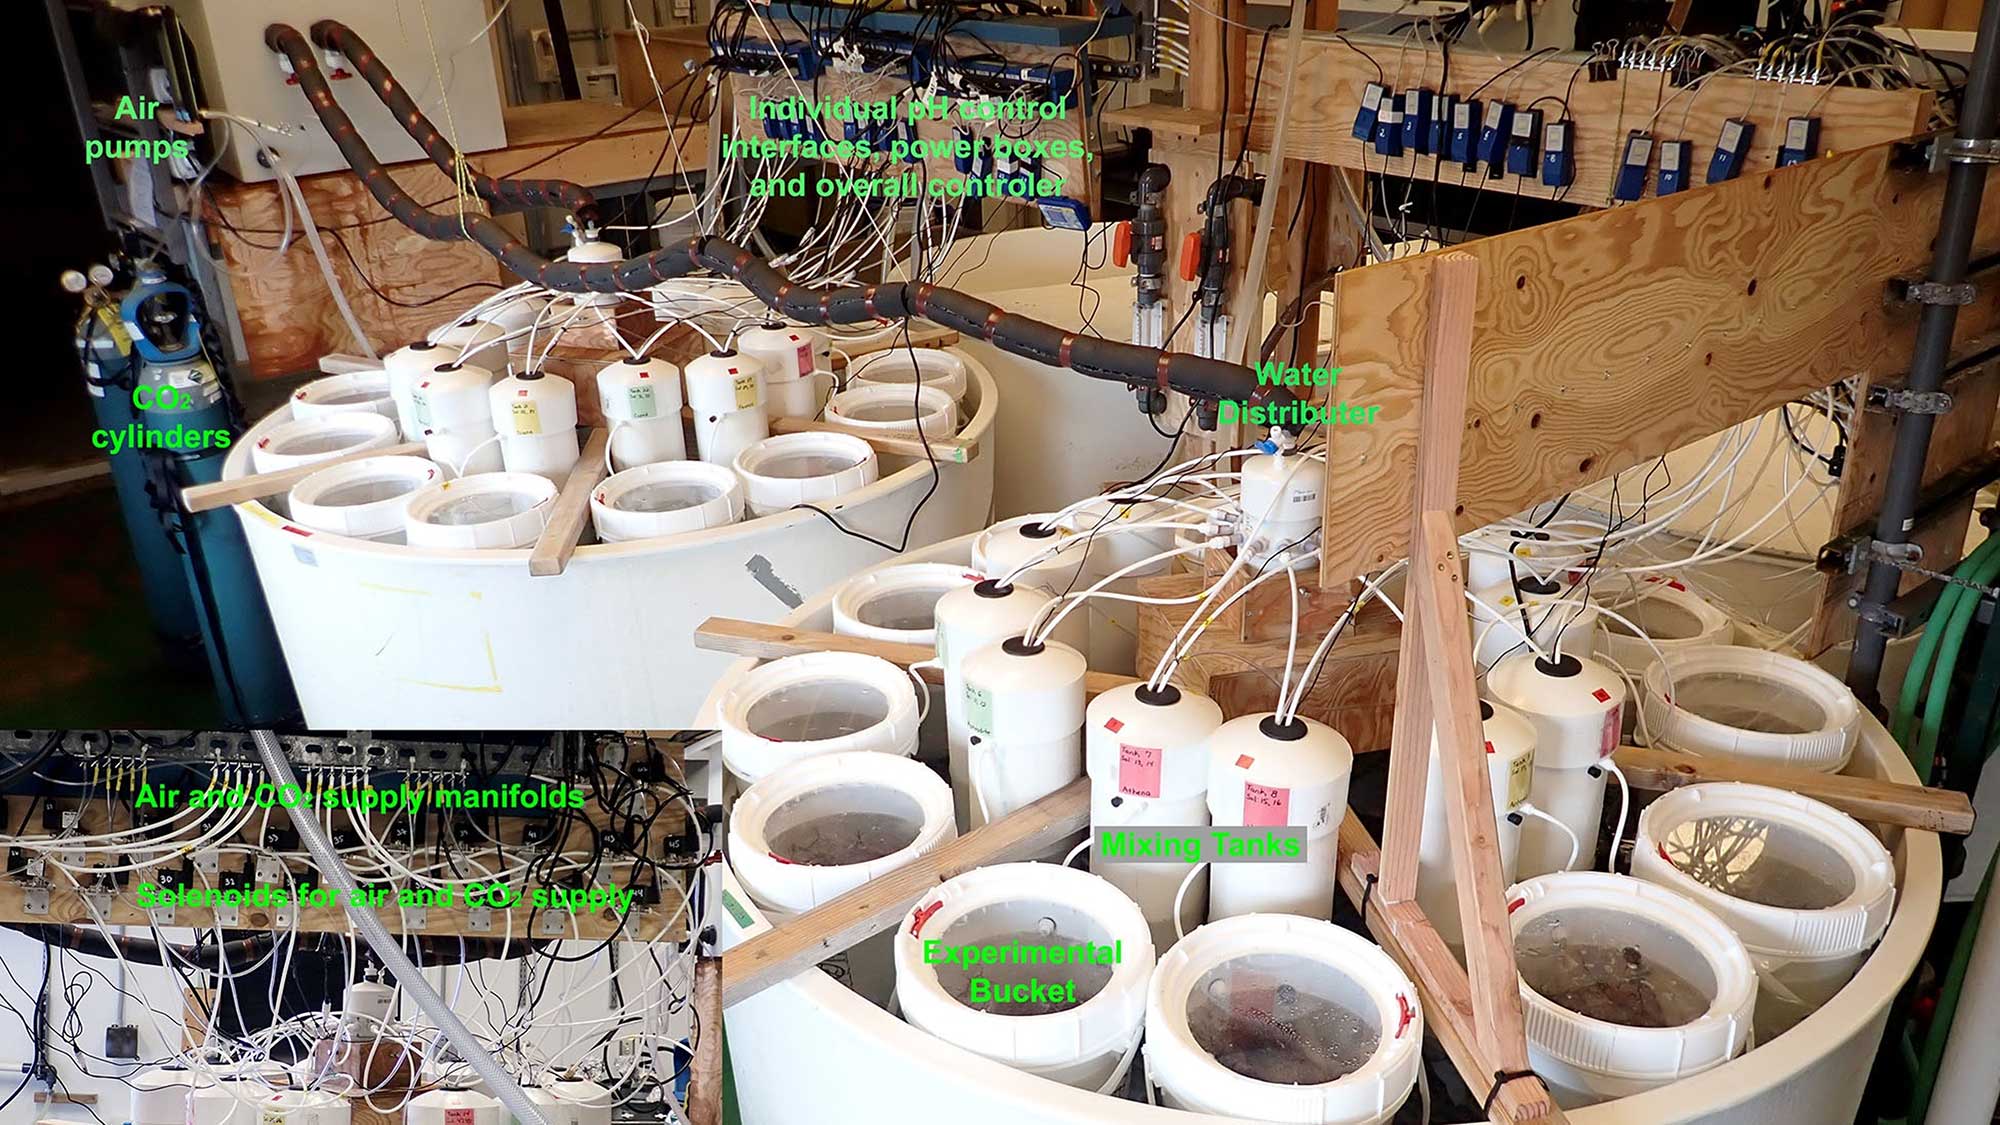 Lab described in the text below. Labels include air pumps, CO2 cylinders, mixing tanks, water distributer, experimental bucket, supply manifolds, solenoids. 